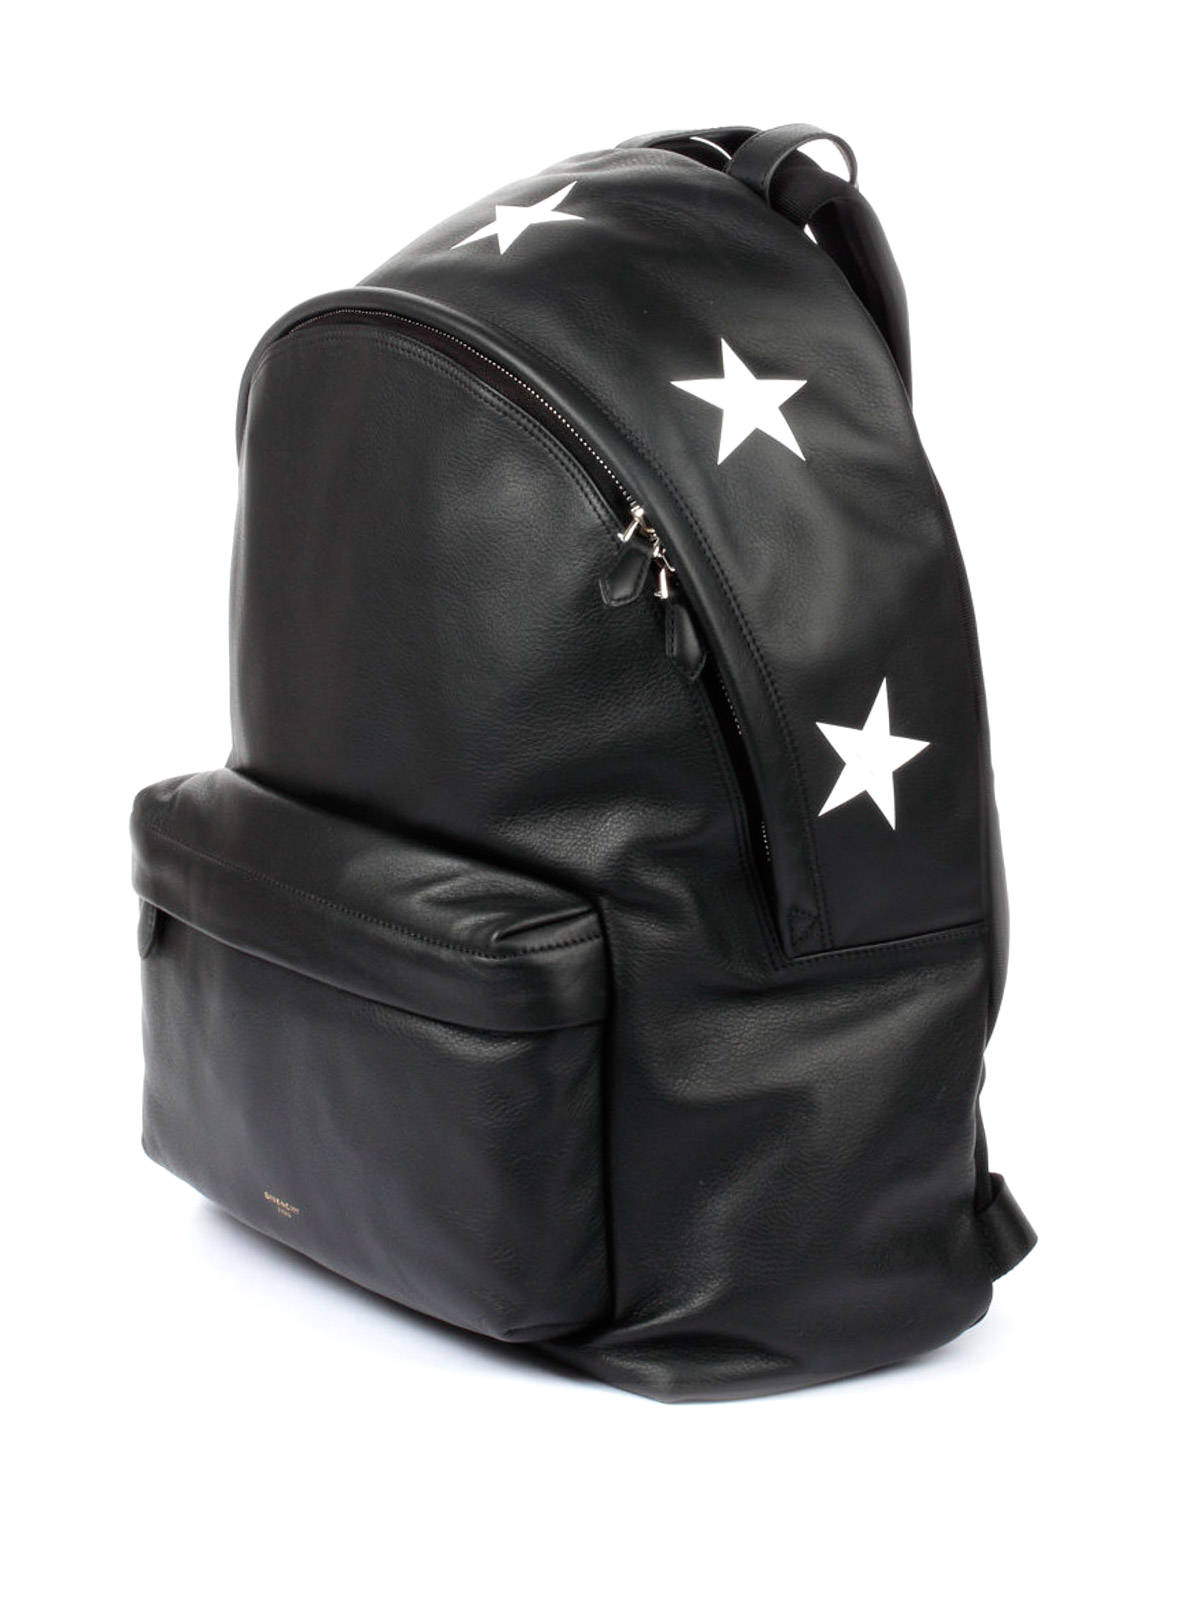 givenchy leather backpack